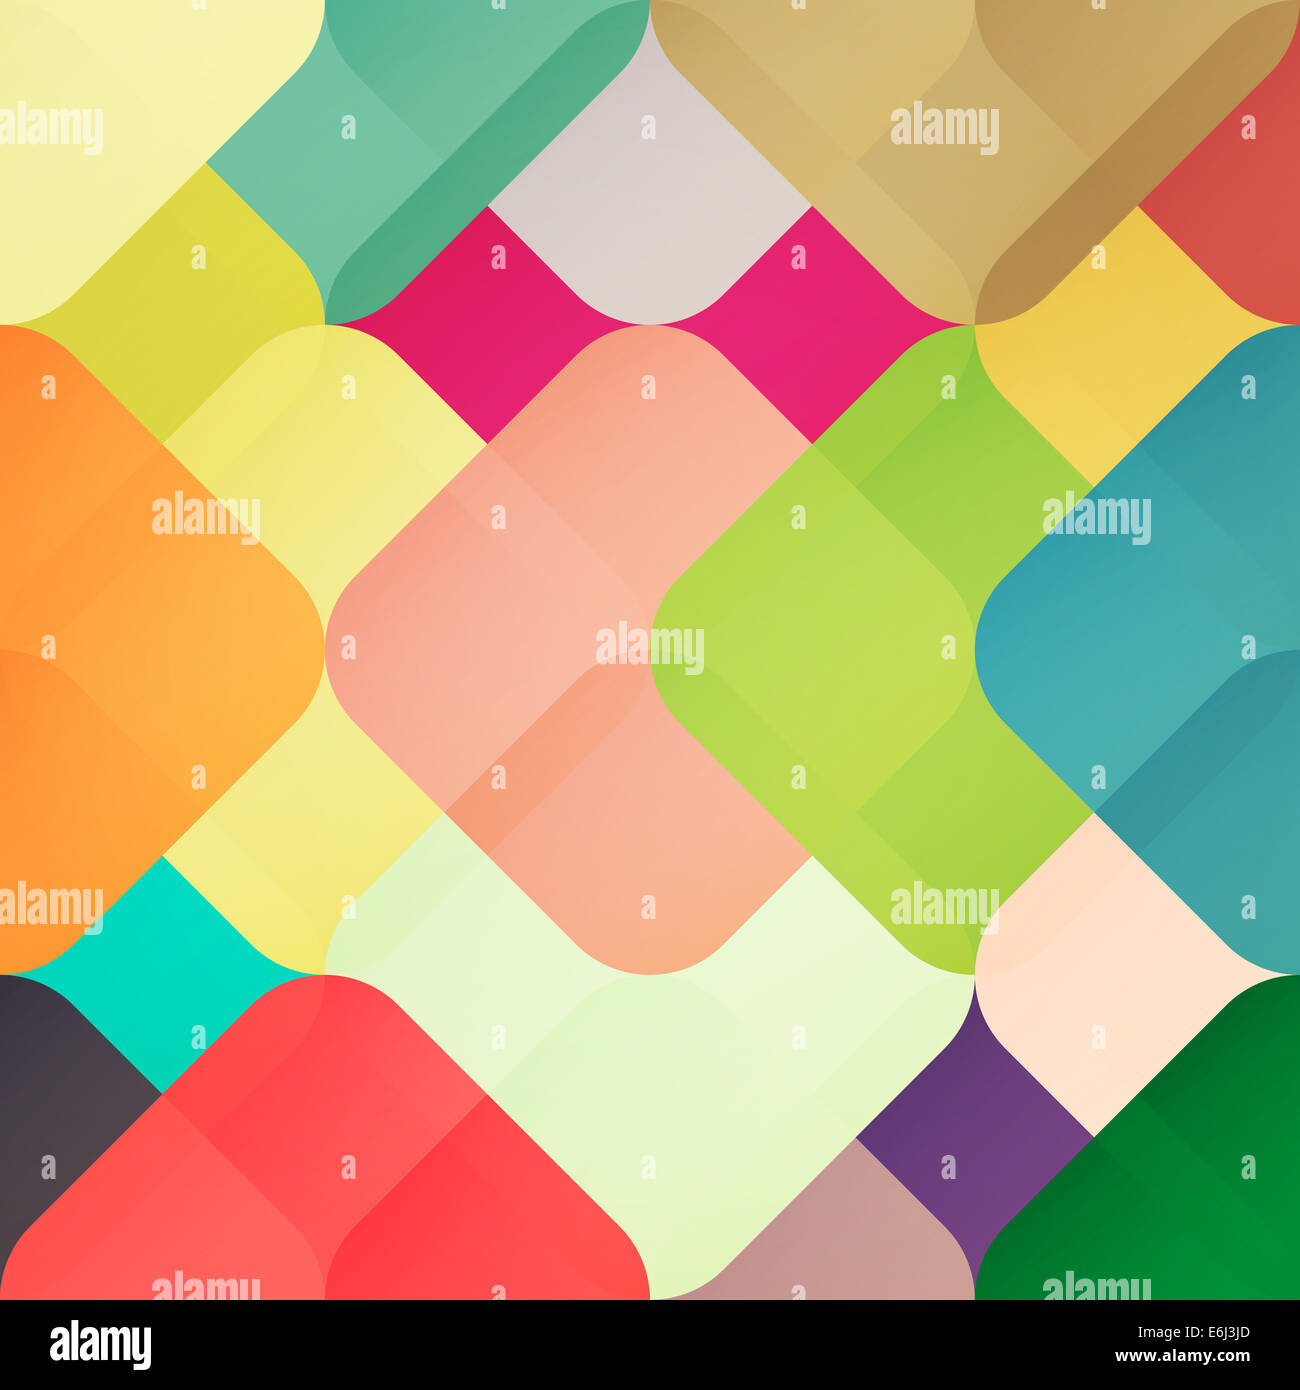 abstract fashion wallpaper with colorful geometric ornament Stock Photo